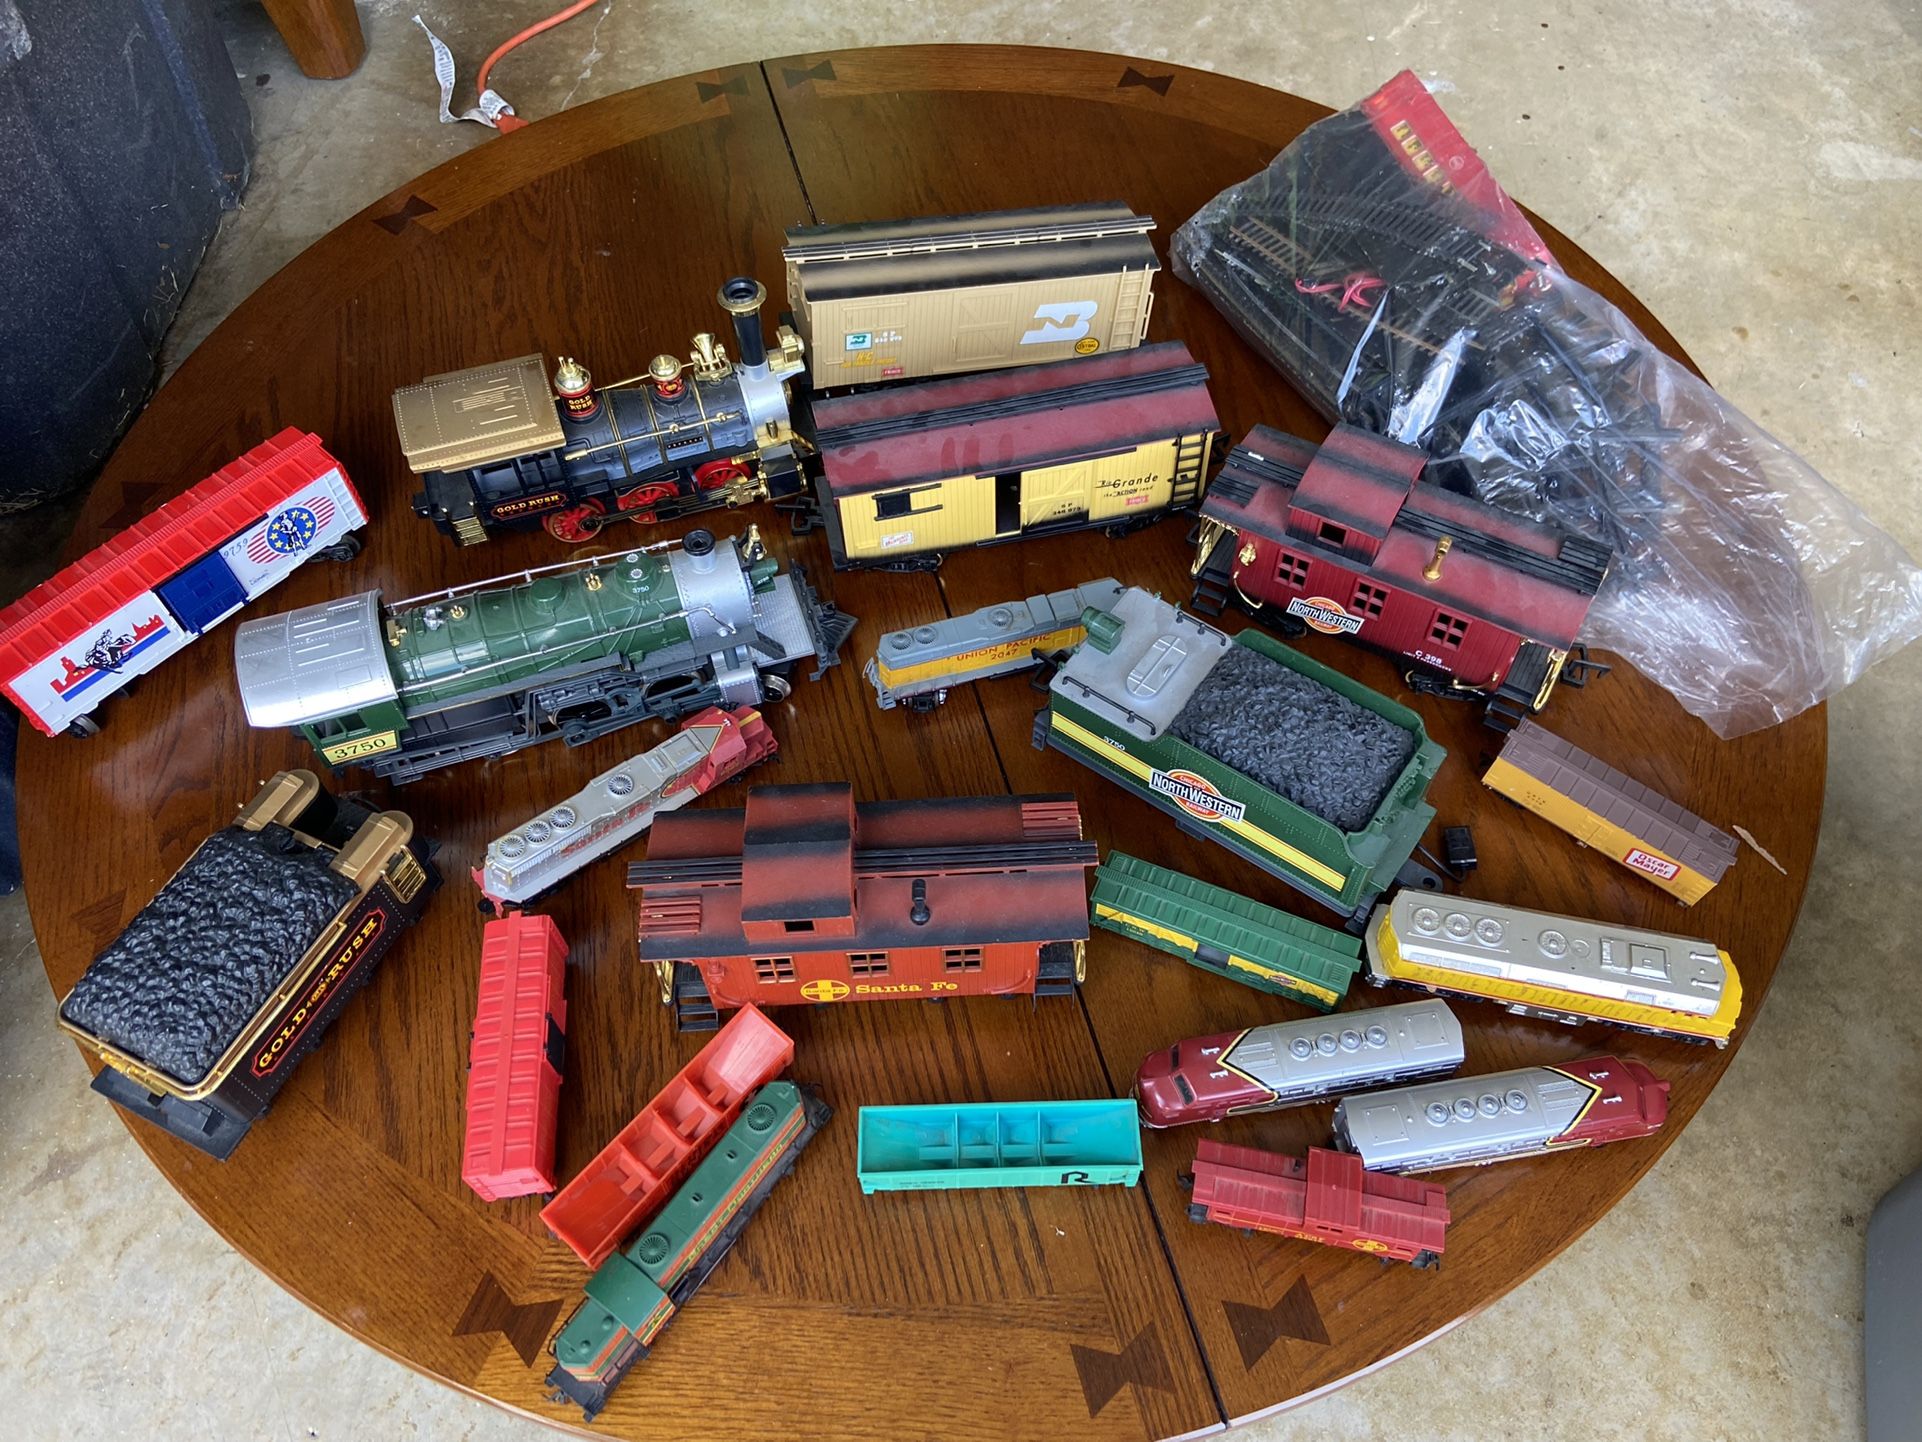 Old Toy Trains